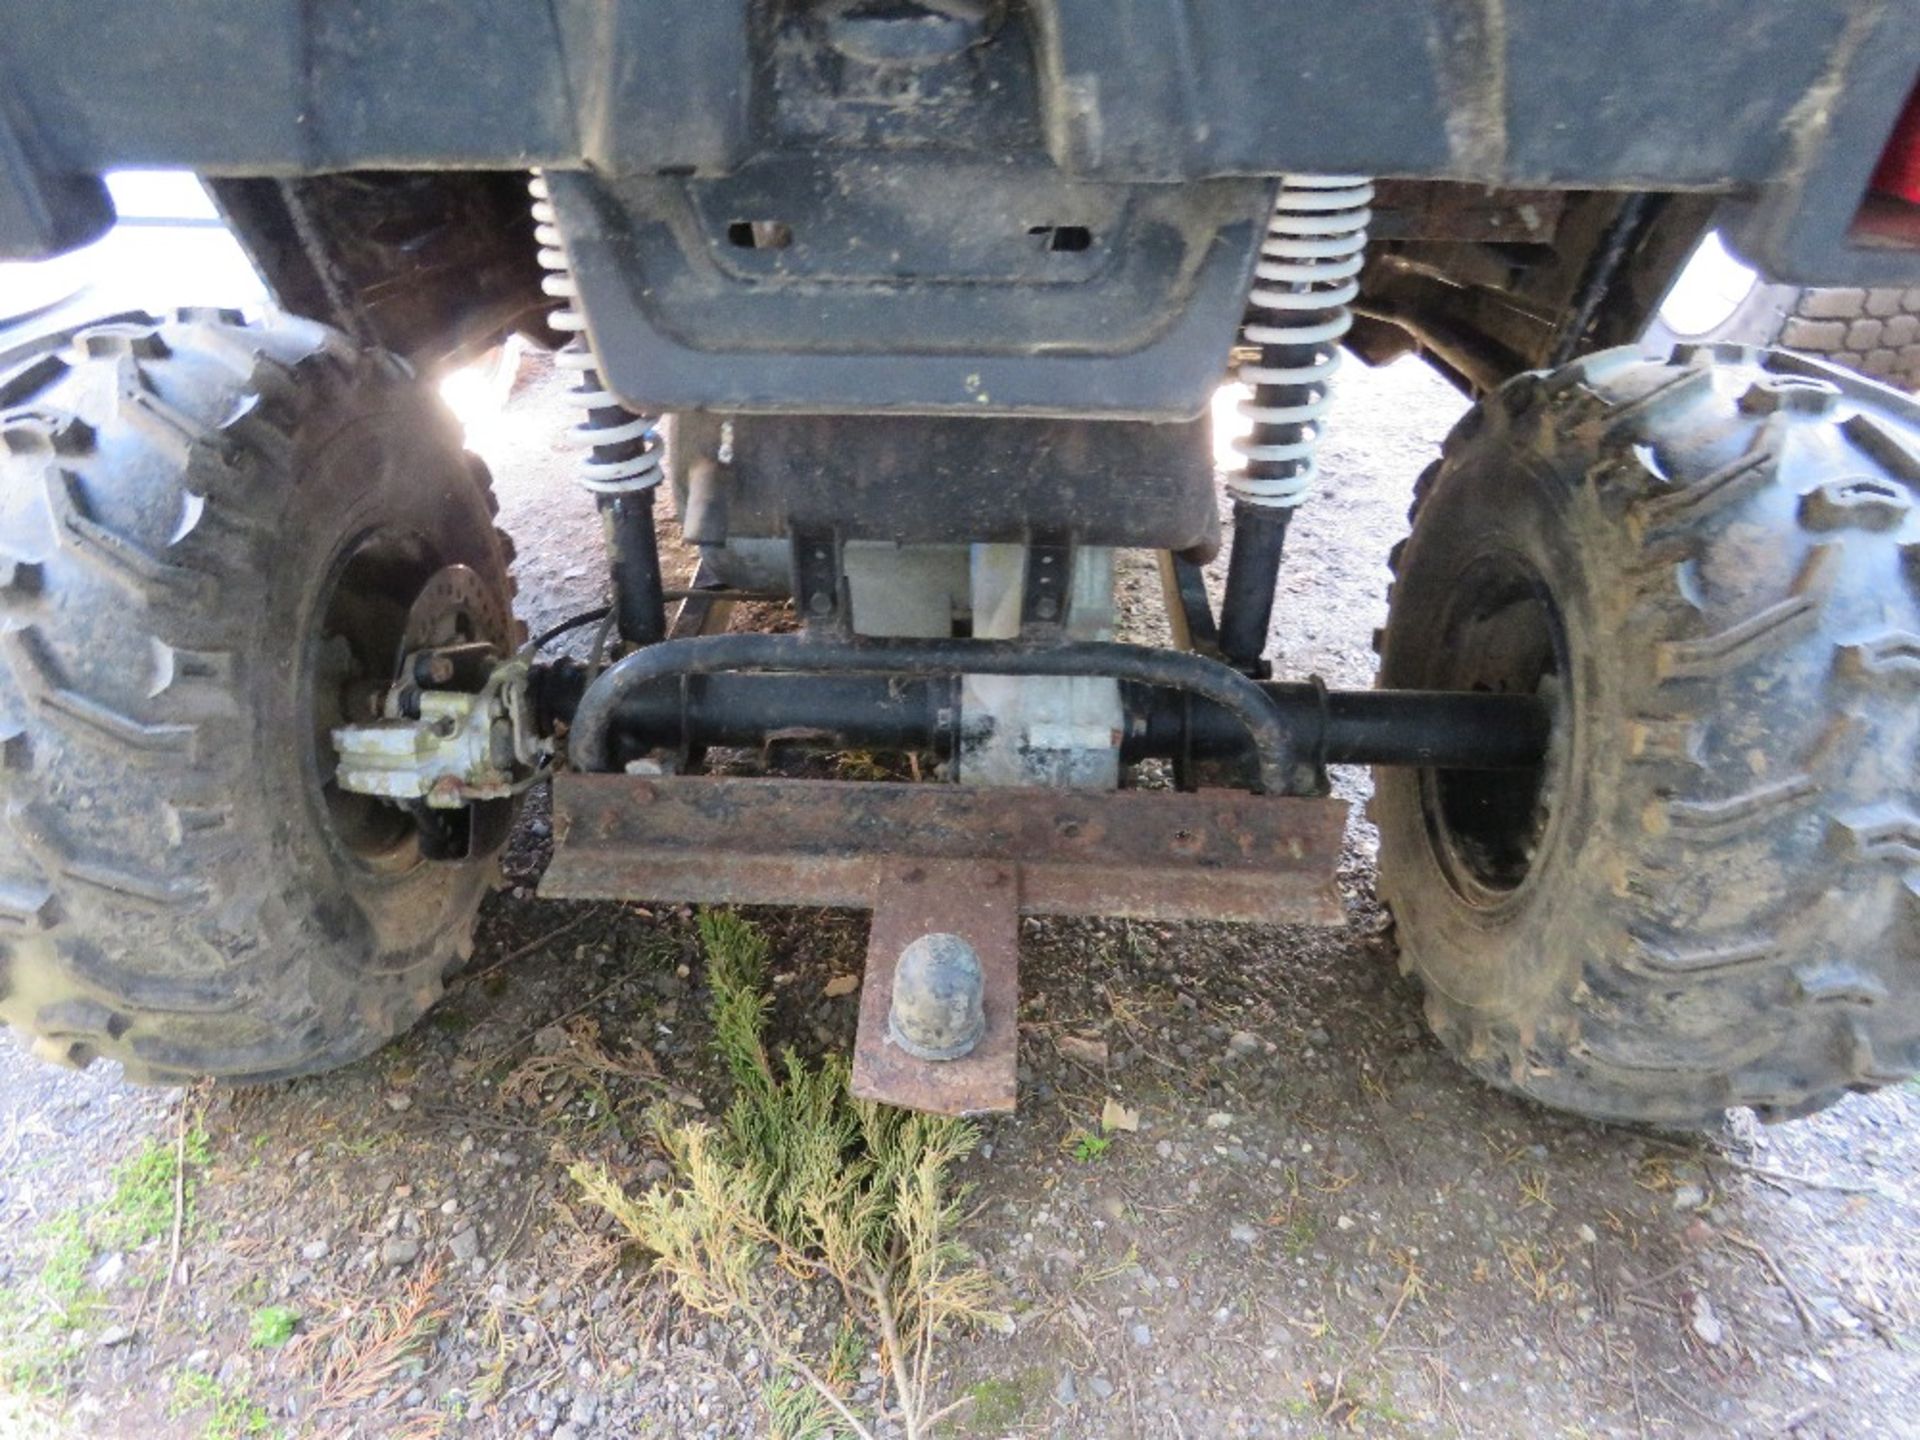 AEON CUBE PETROL ENGINED UTILITY VEHICLE WITH REAR BUCK. ON THE SAME SMALLHOLDING FROM NEW. WHEN TES - Image 9 of 13